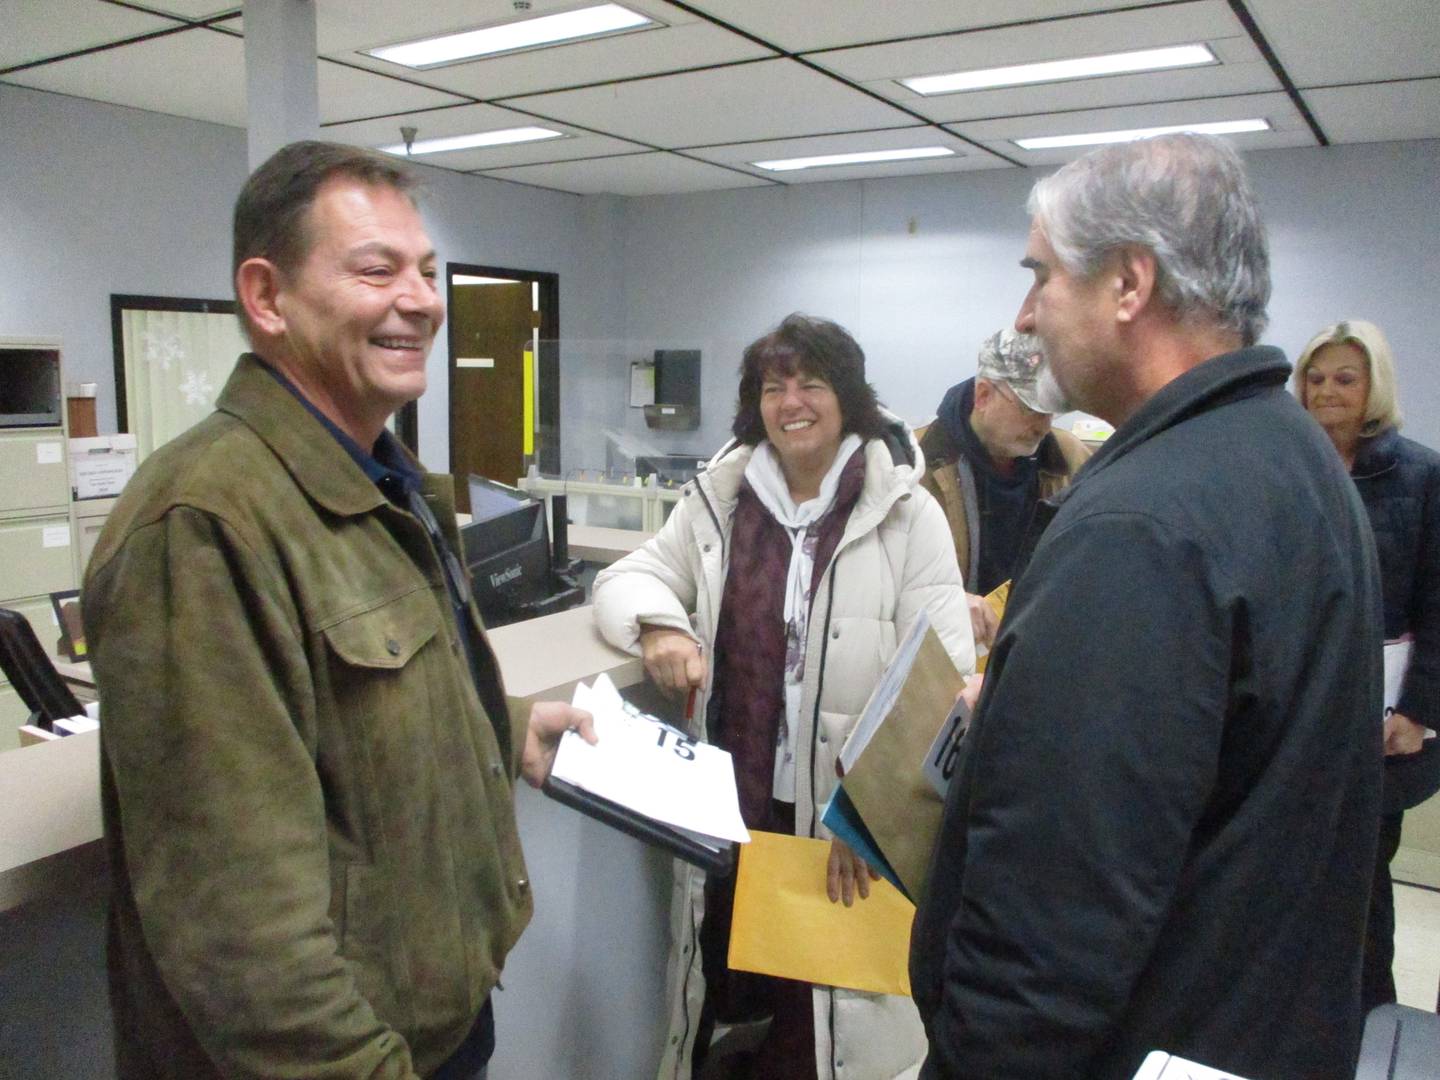 Candidates (from left) Curt Mason, a Homer Glen trustee seeking a precinct committeeman post, Dawn Buillock running for Will County Board, and Dave Sinkus, seeking a precinct committeeman post in Homer Township enjoy a moment while waiting in line to file their petitions for candidacy Monday, Nov. 27, 2023, at the Will County Clerk's office.